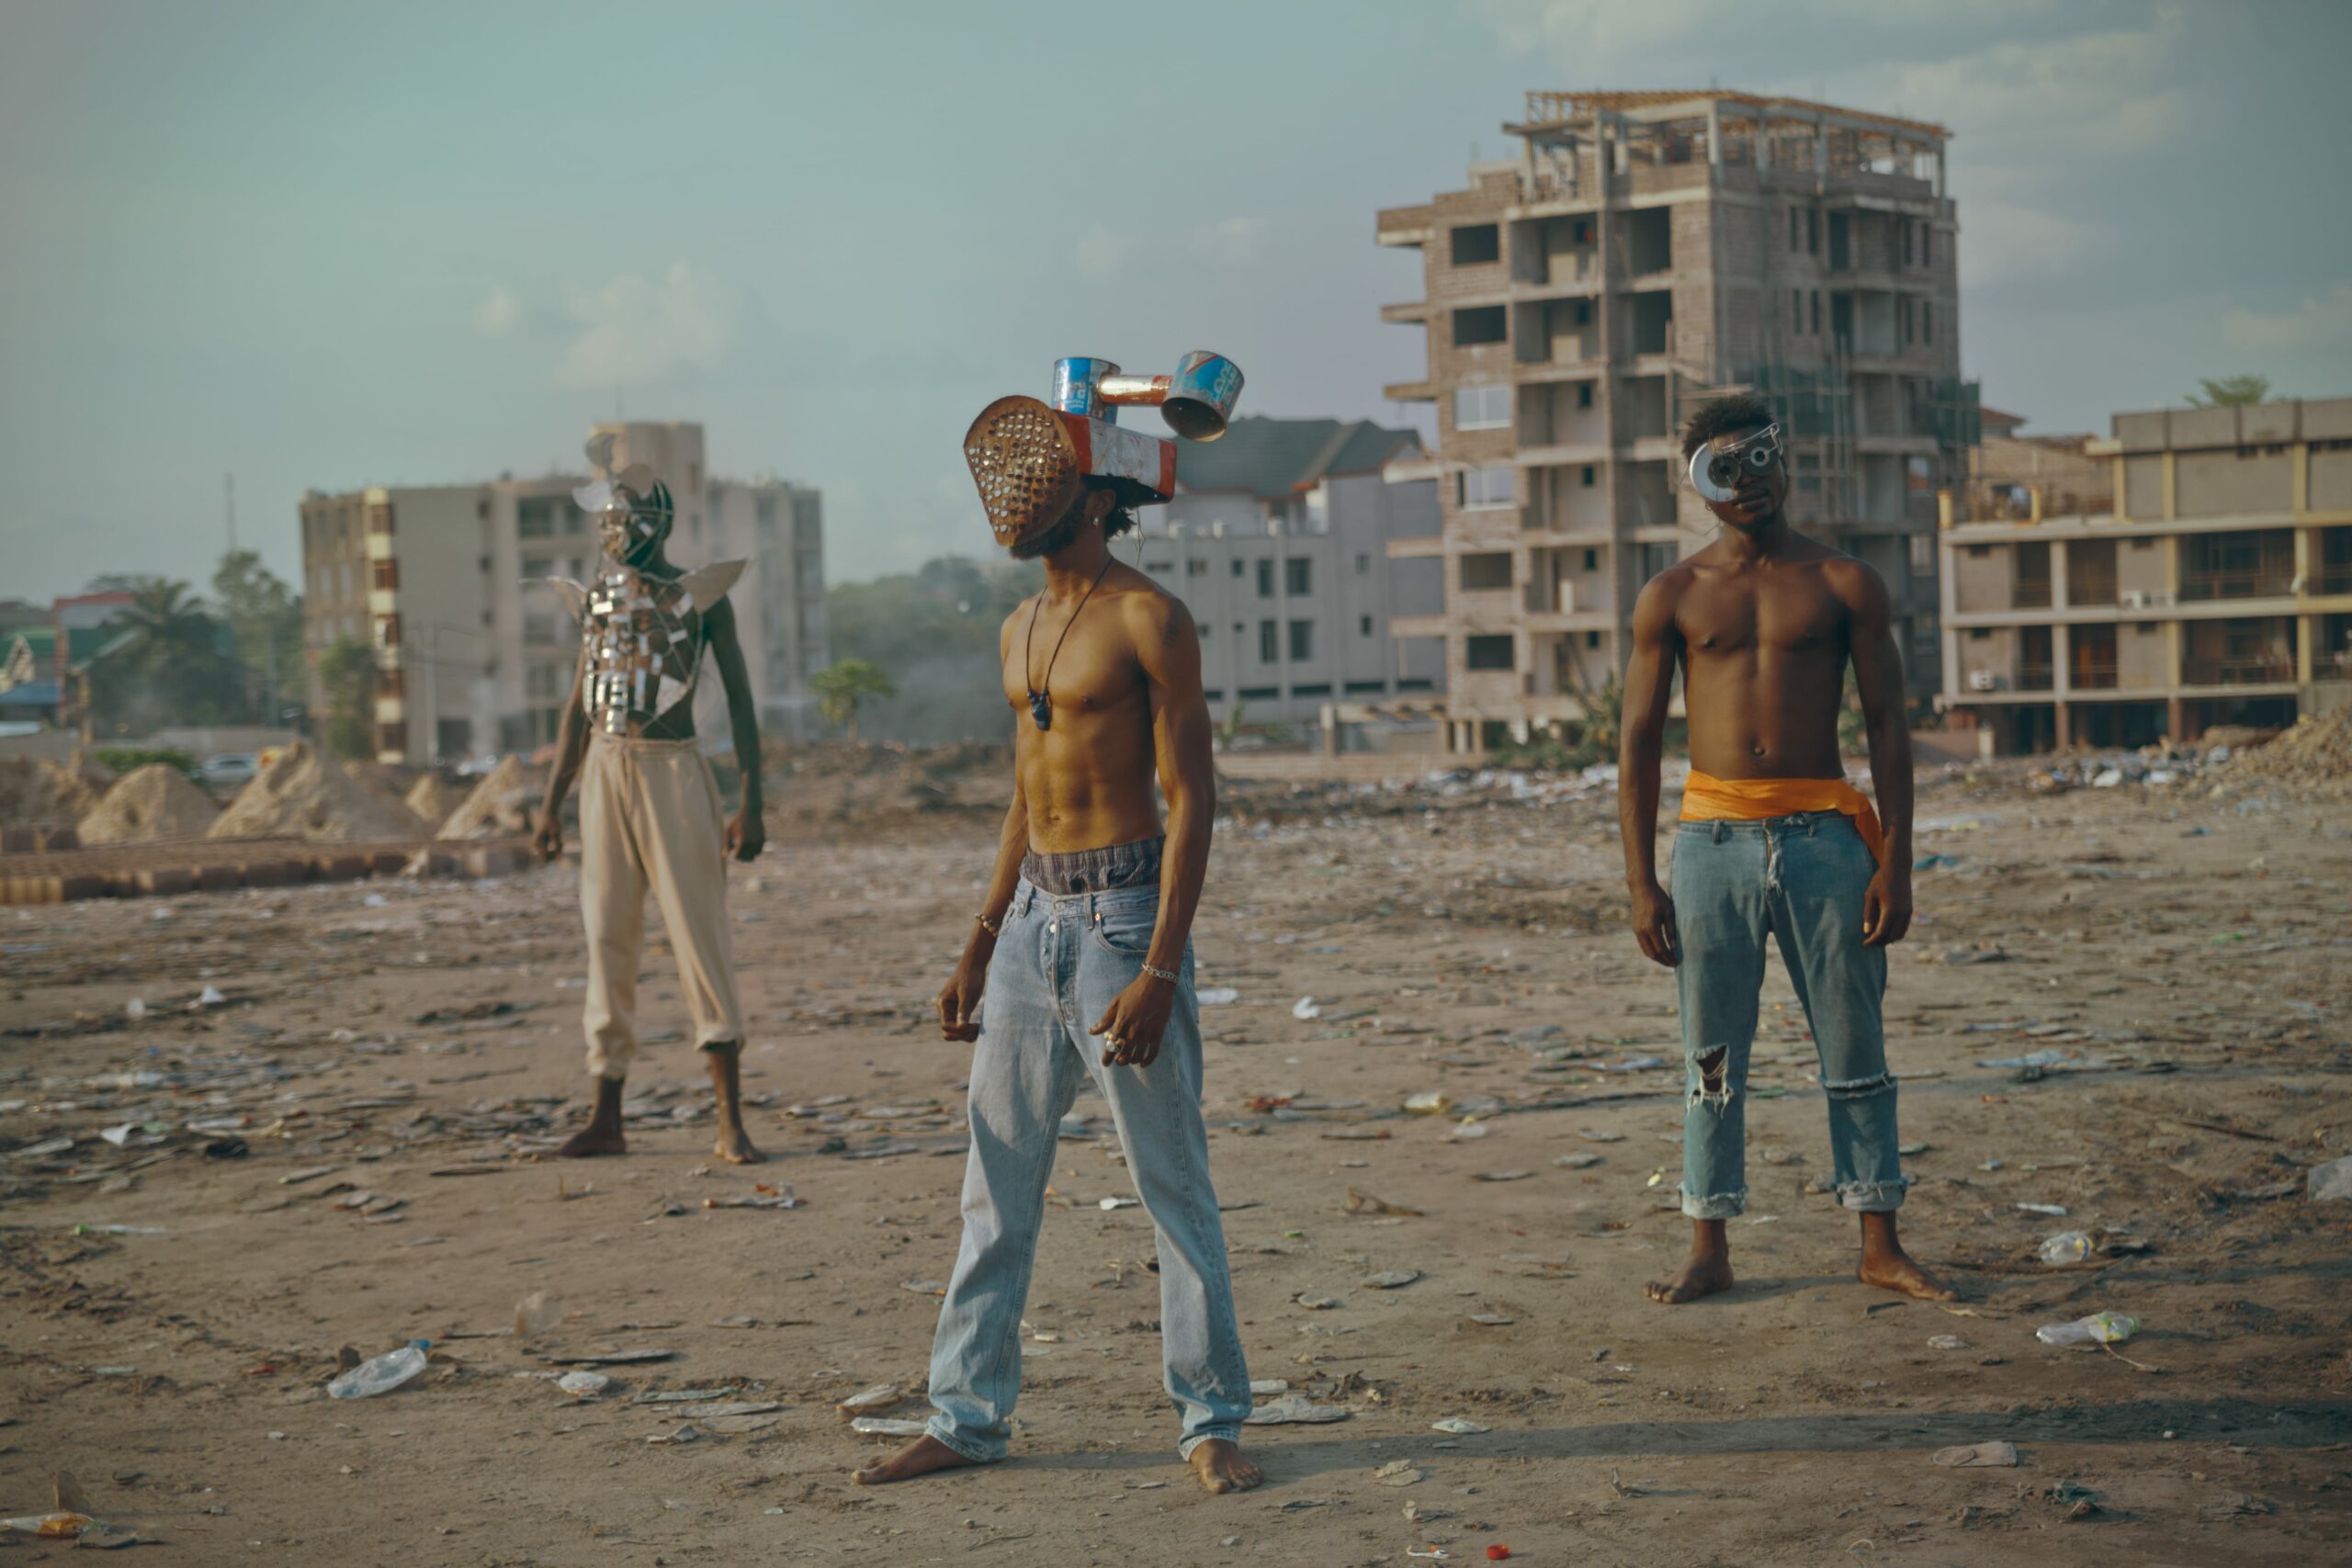 The West uses Kinshasa as a dumping ground, this collective makes it into art